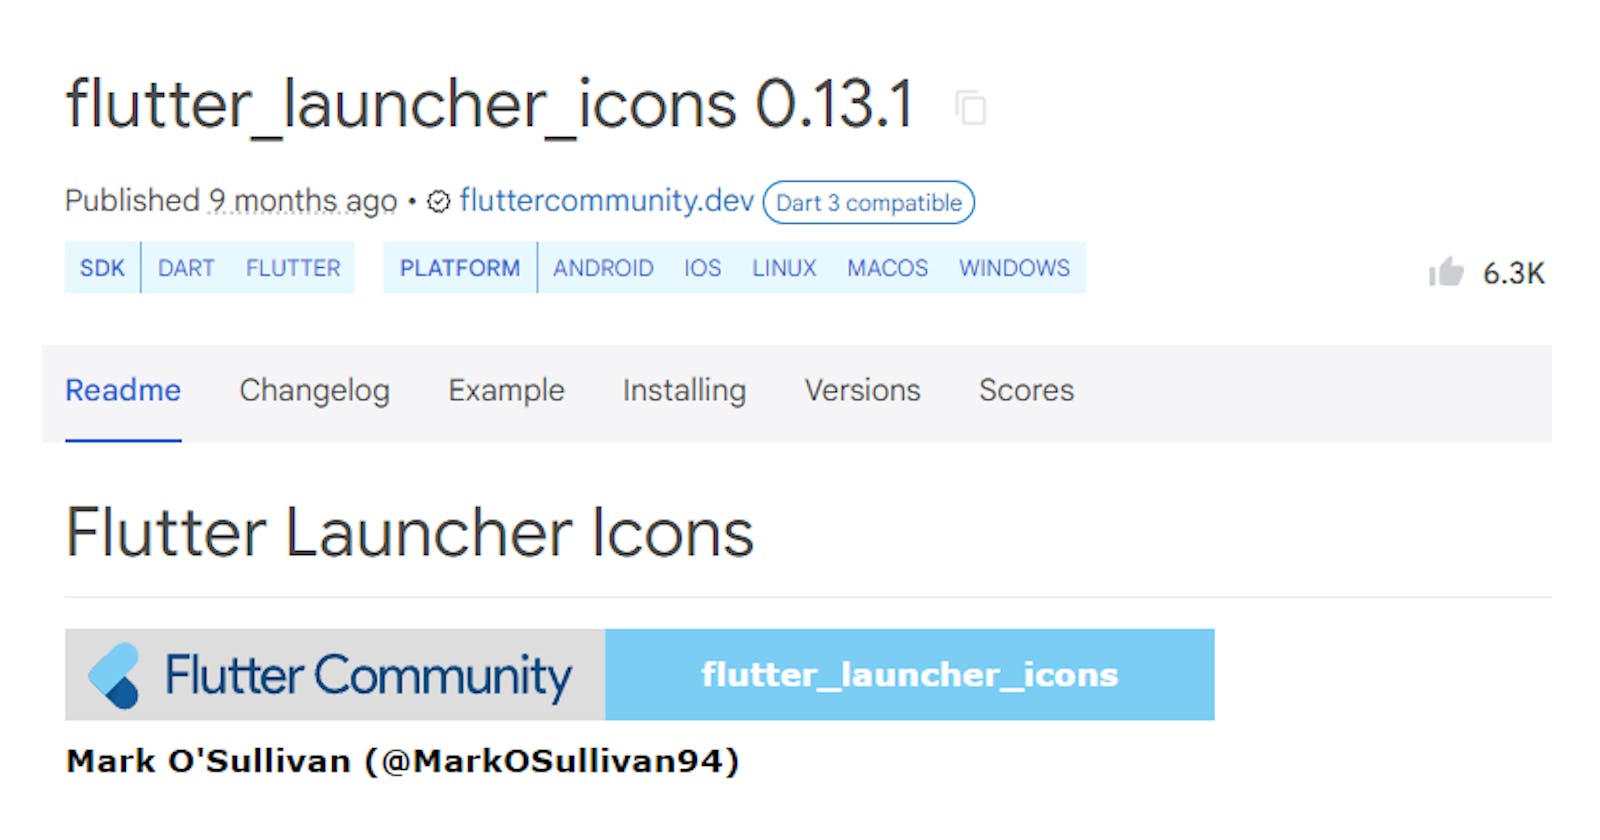 A Step-by-Step Guide to Adding Launcher Icons to Your Flutter App